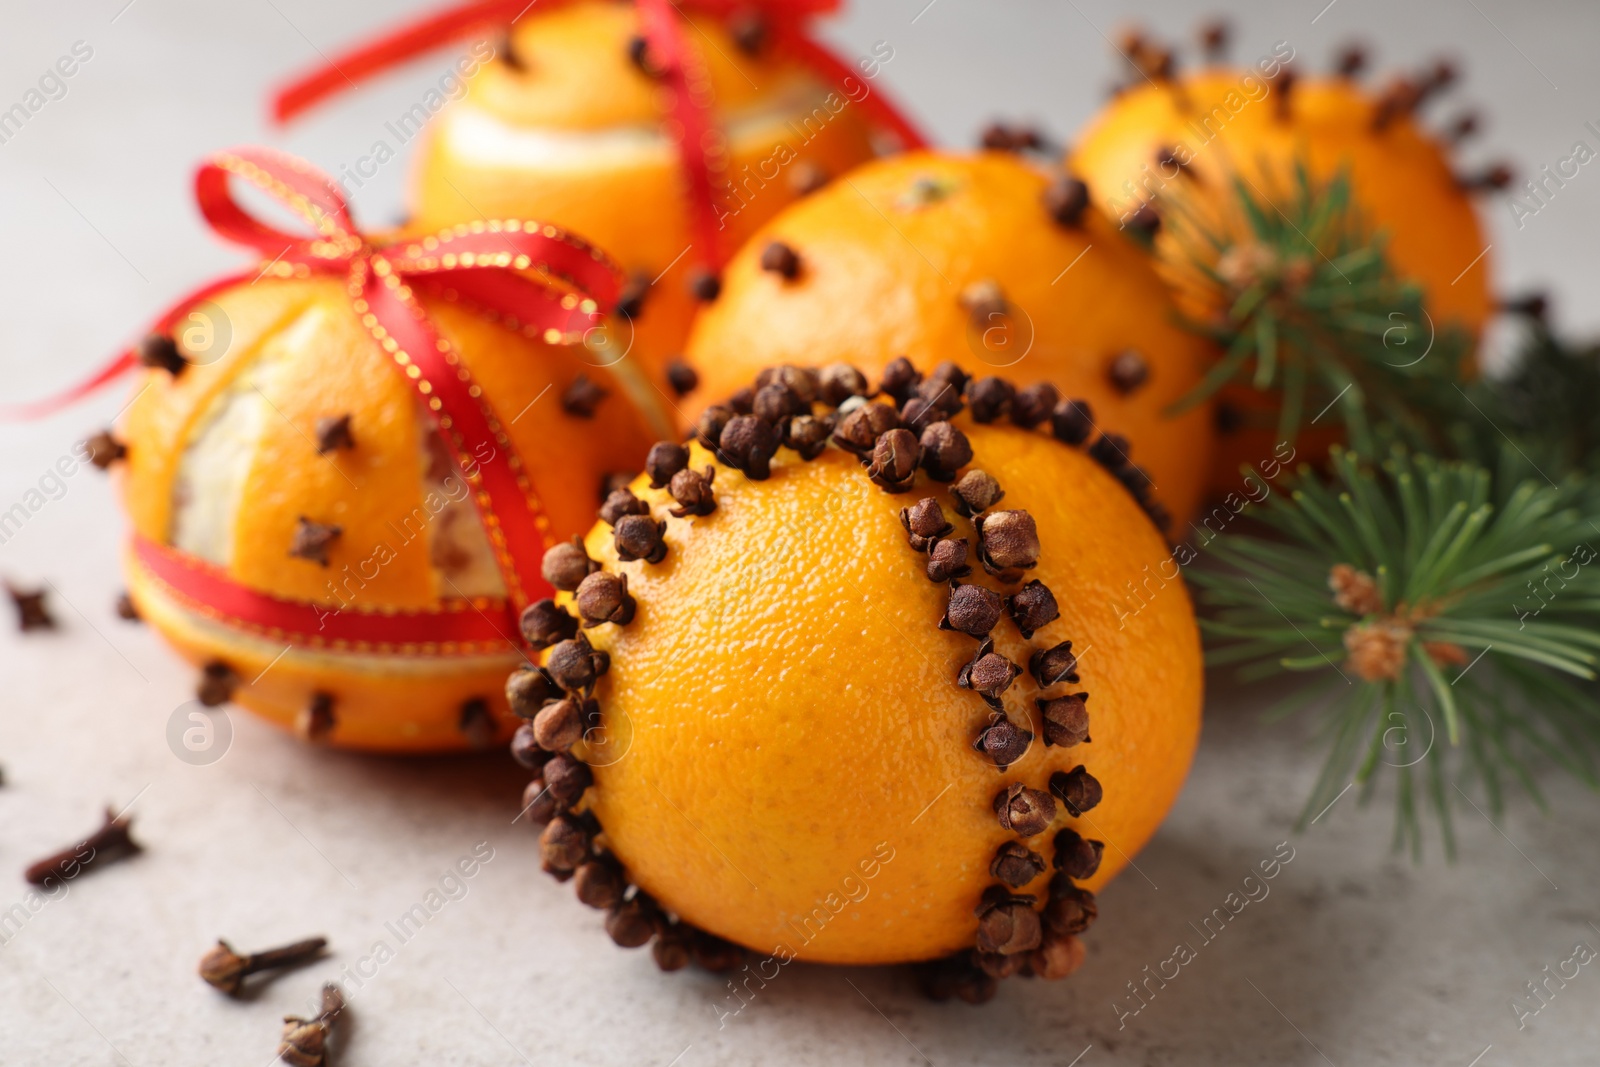 Photo of Pomander balls made of tangerines with cloves and fir branch on grey table, closeup